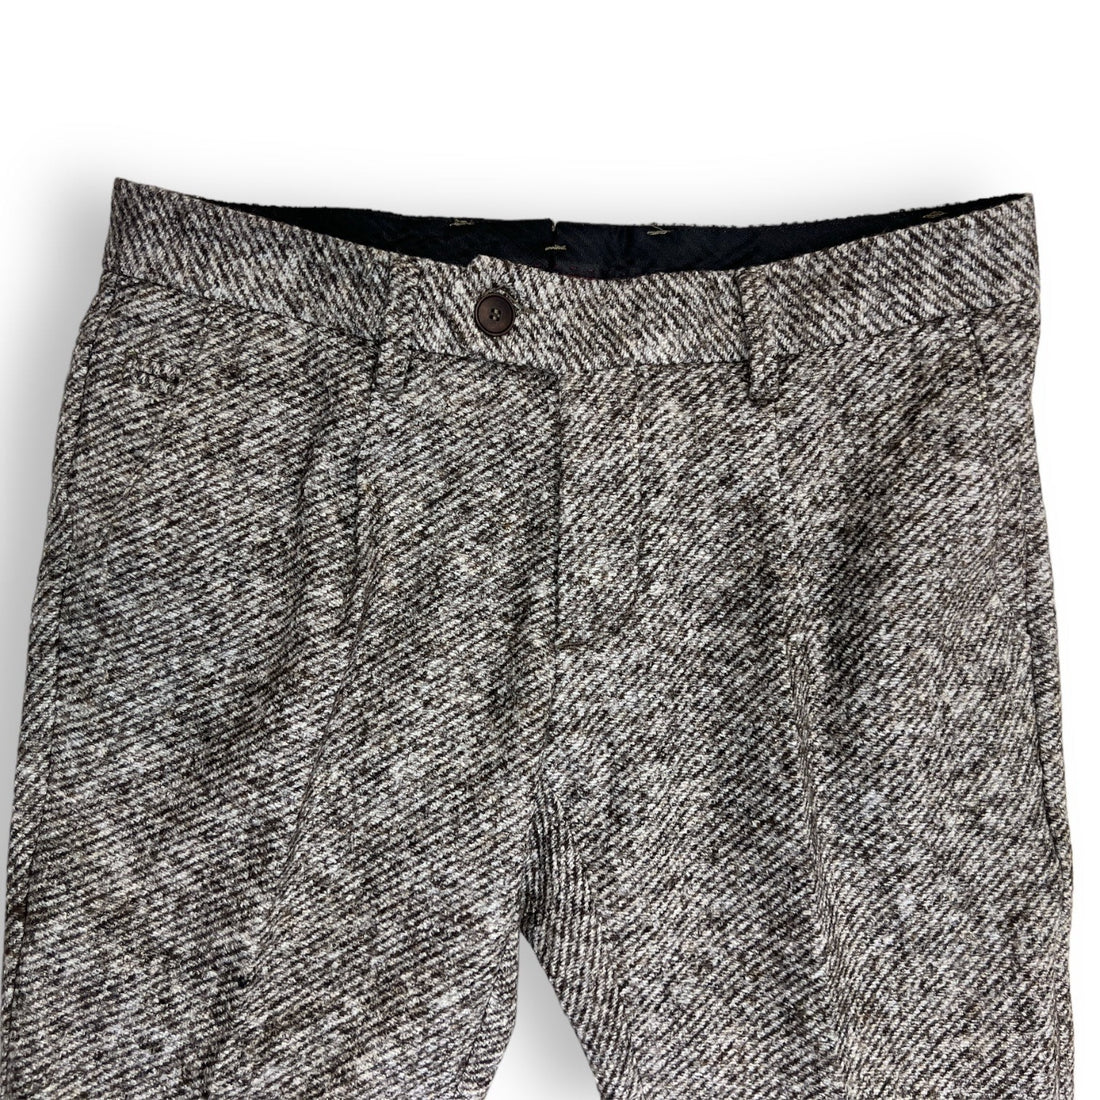 Single pleat pant in brown/grey soft combed wool